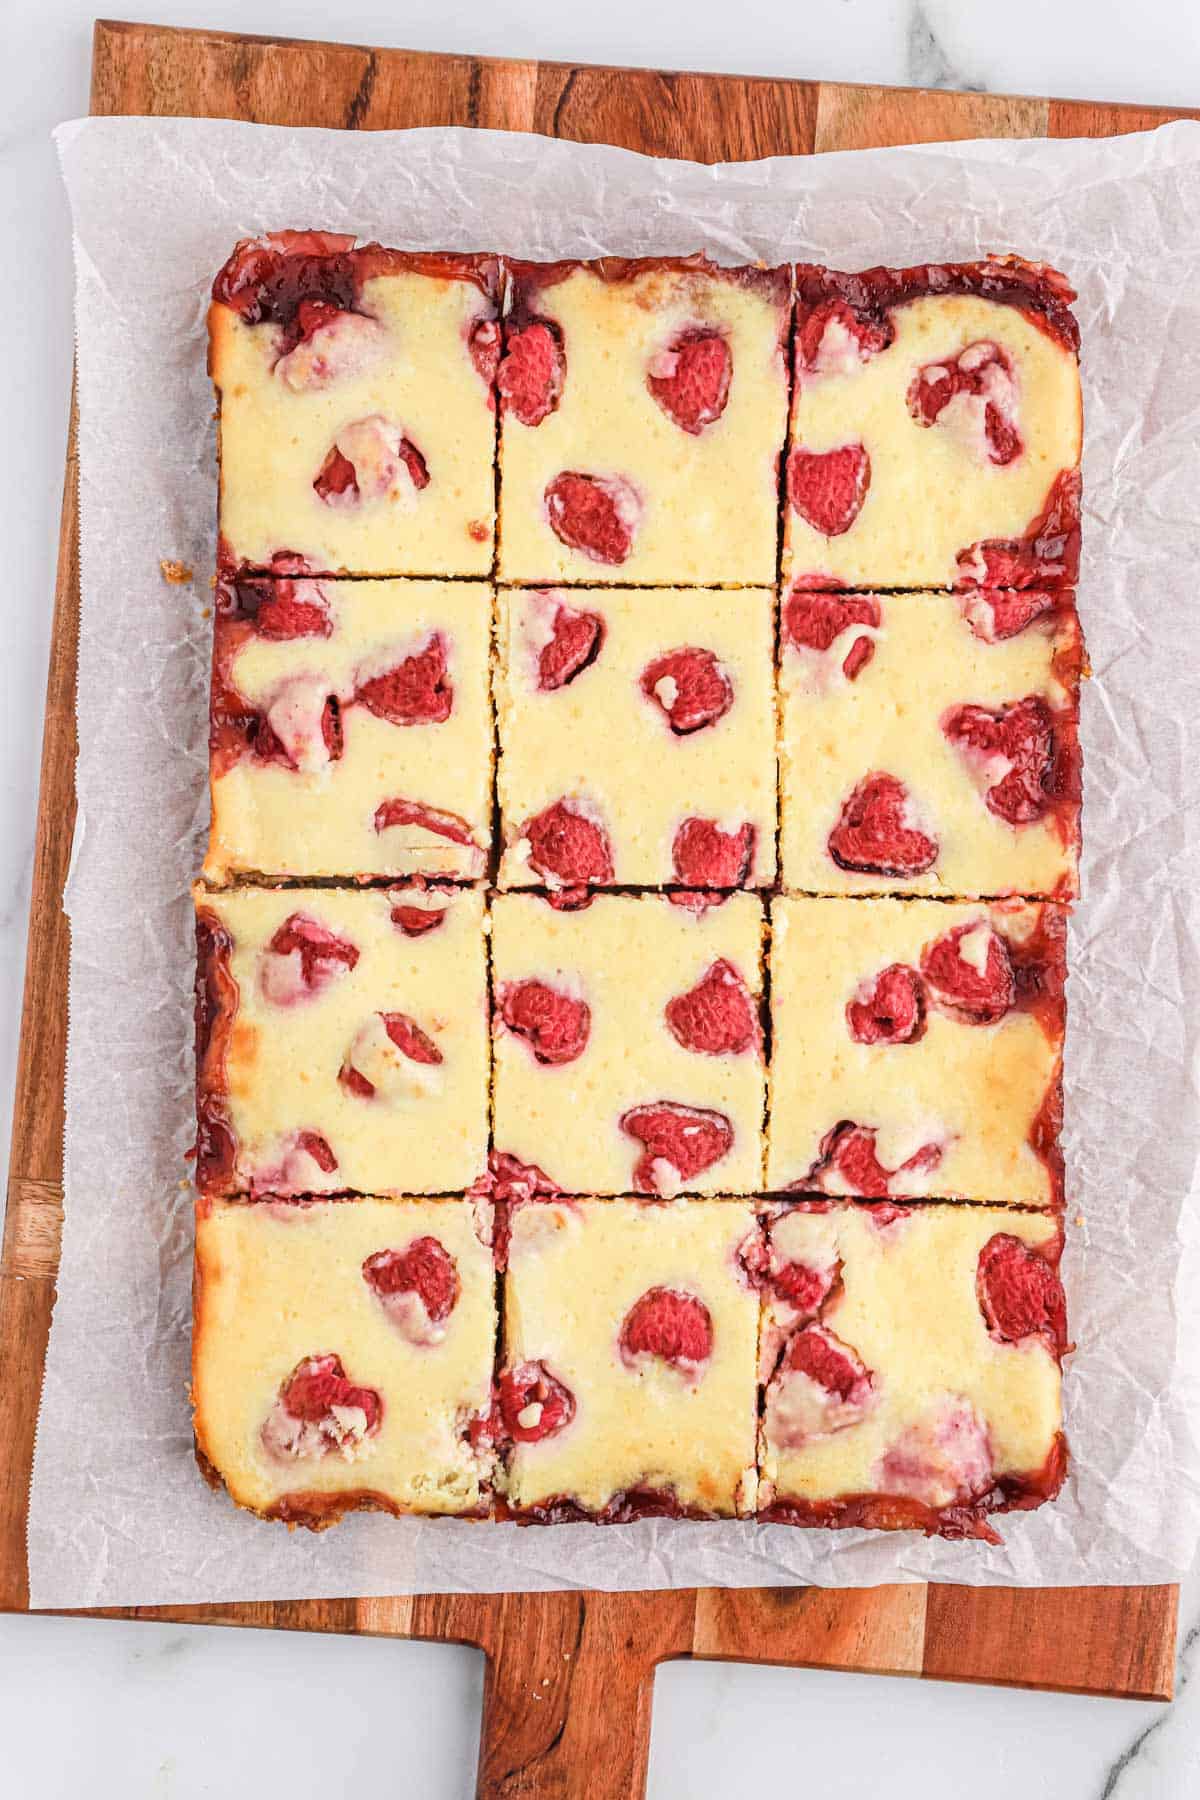 Raspberry lemon bars on a cutting board and parchment cut into squares.